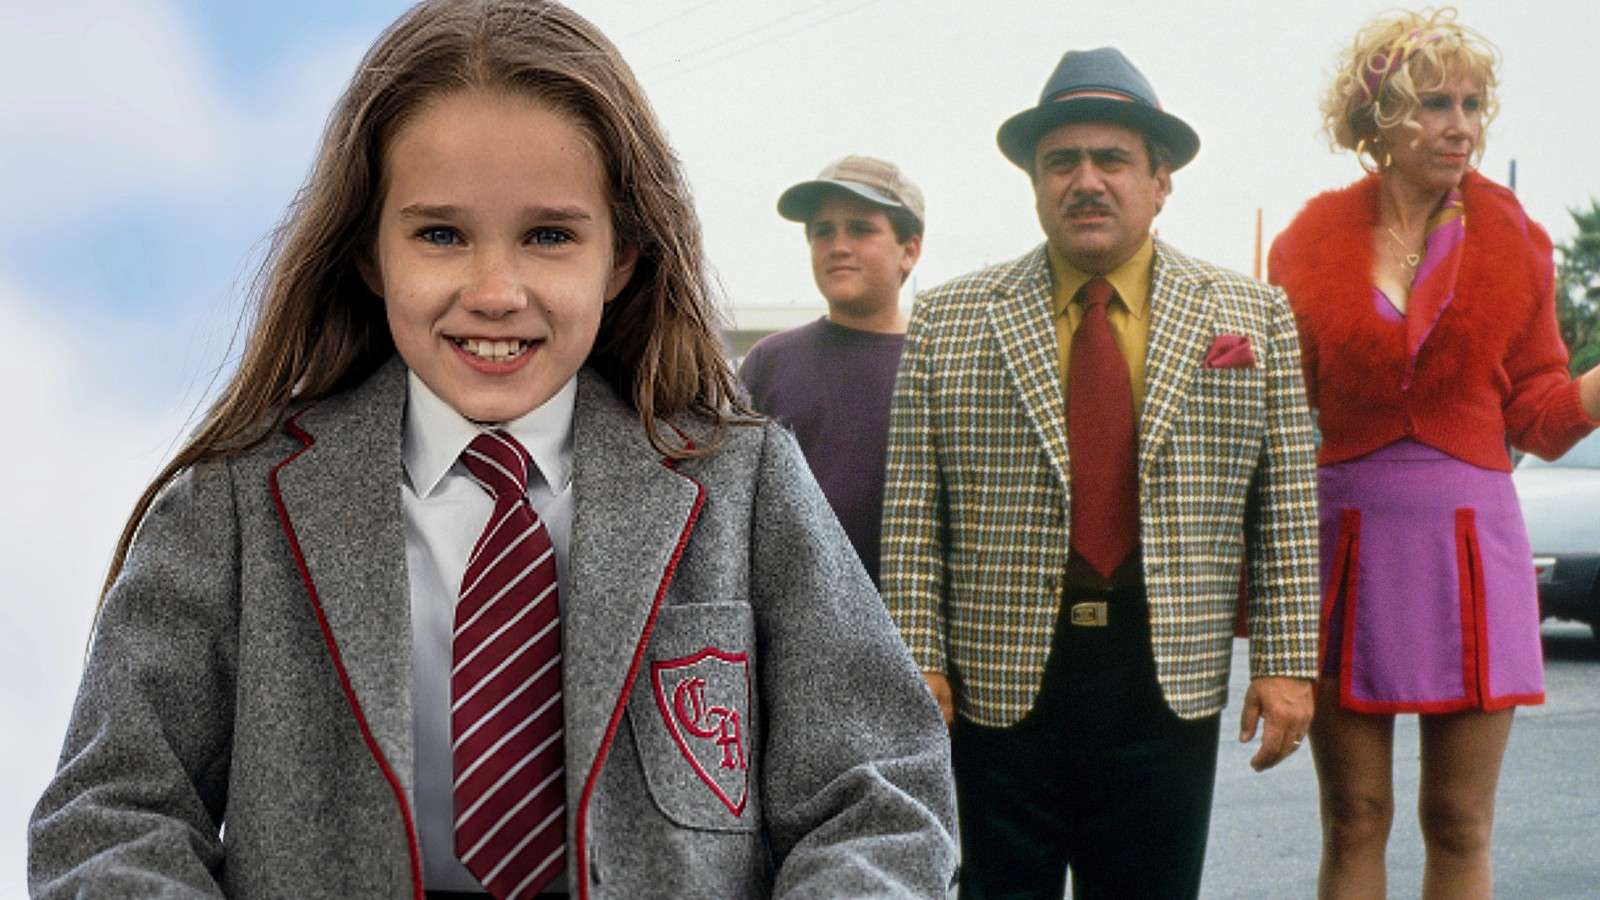 Alisha Weir as Matilda in the 2022 musical and the cast of the 1996 movie